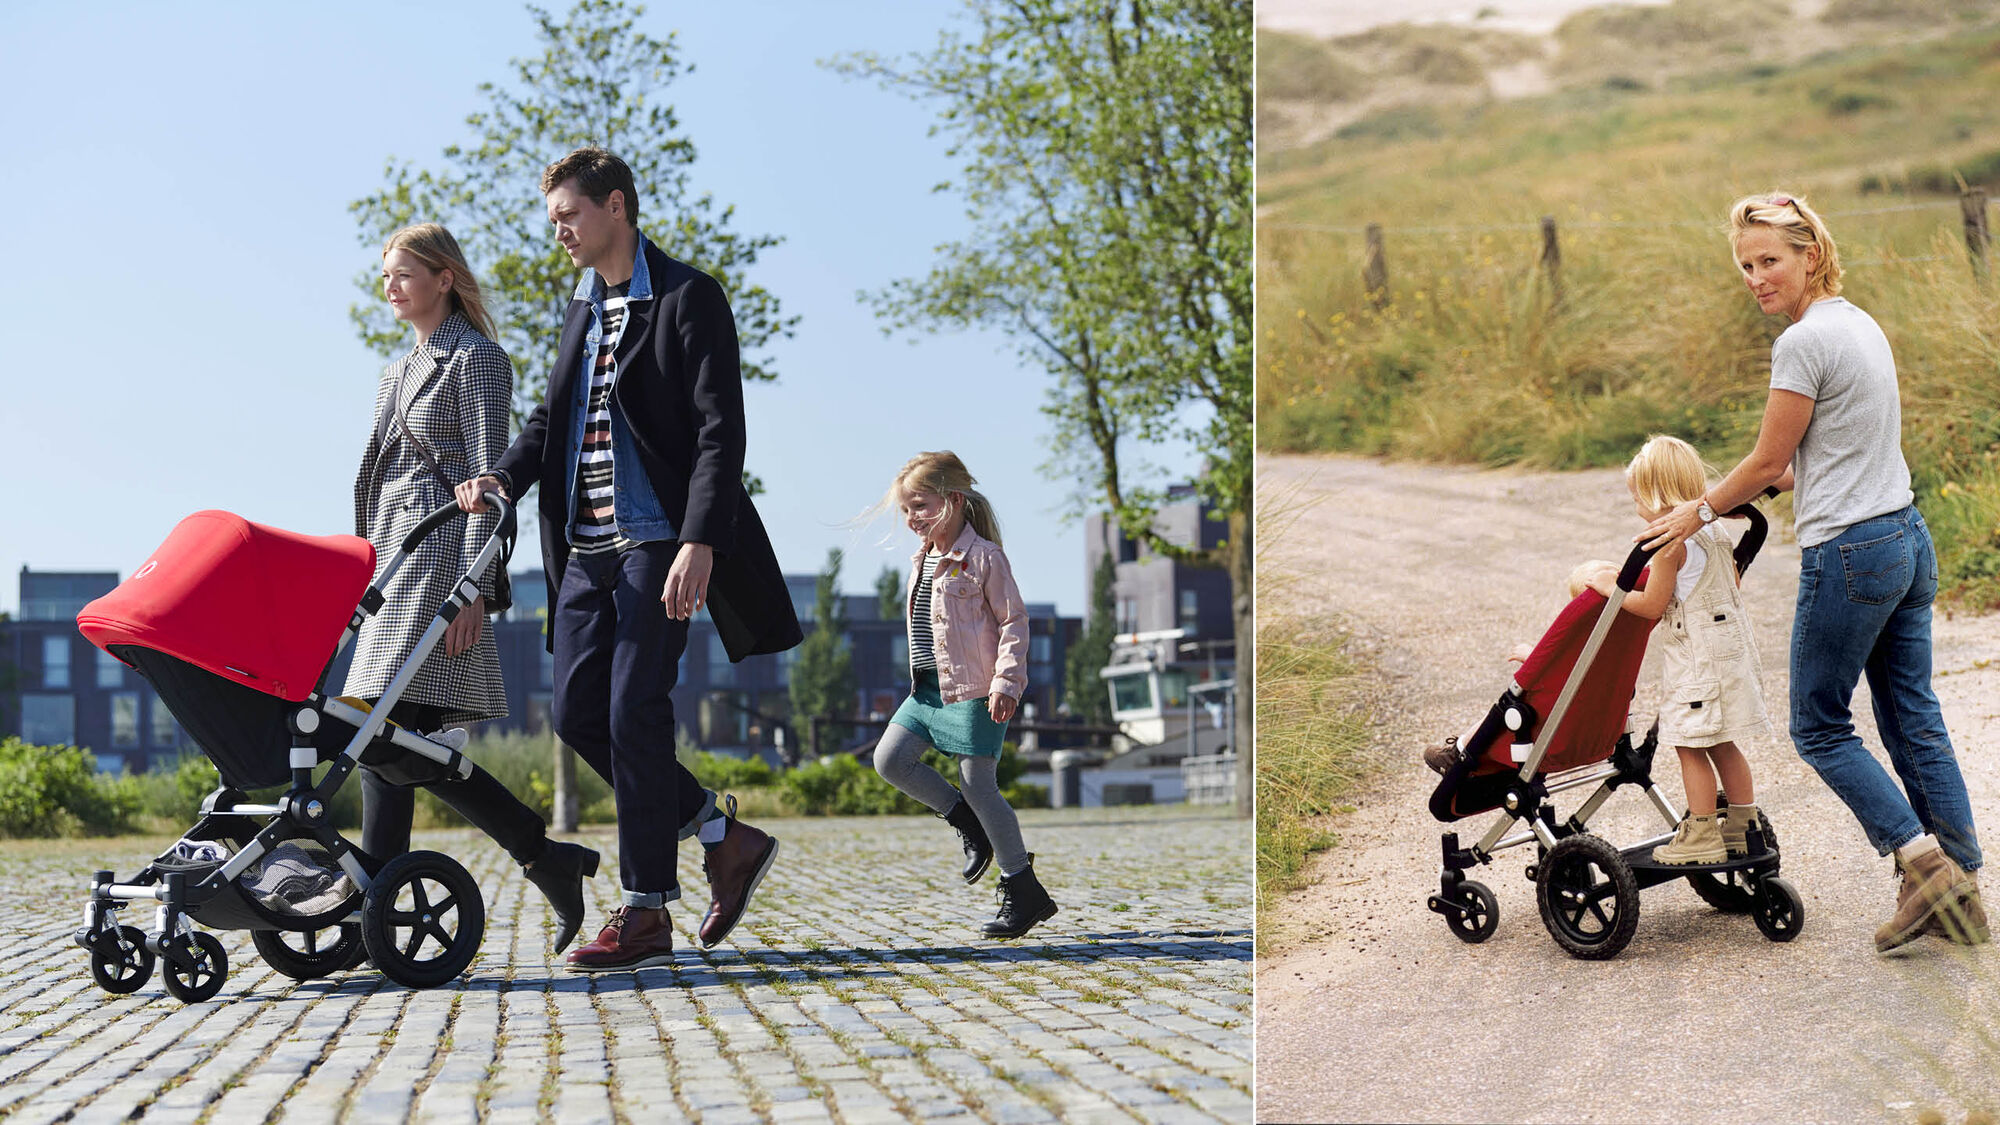 Where it all began: celebrating 20 years of Bugaboo